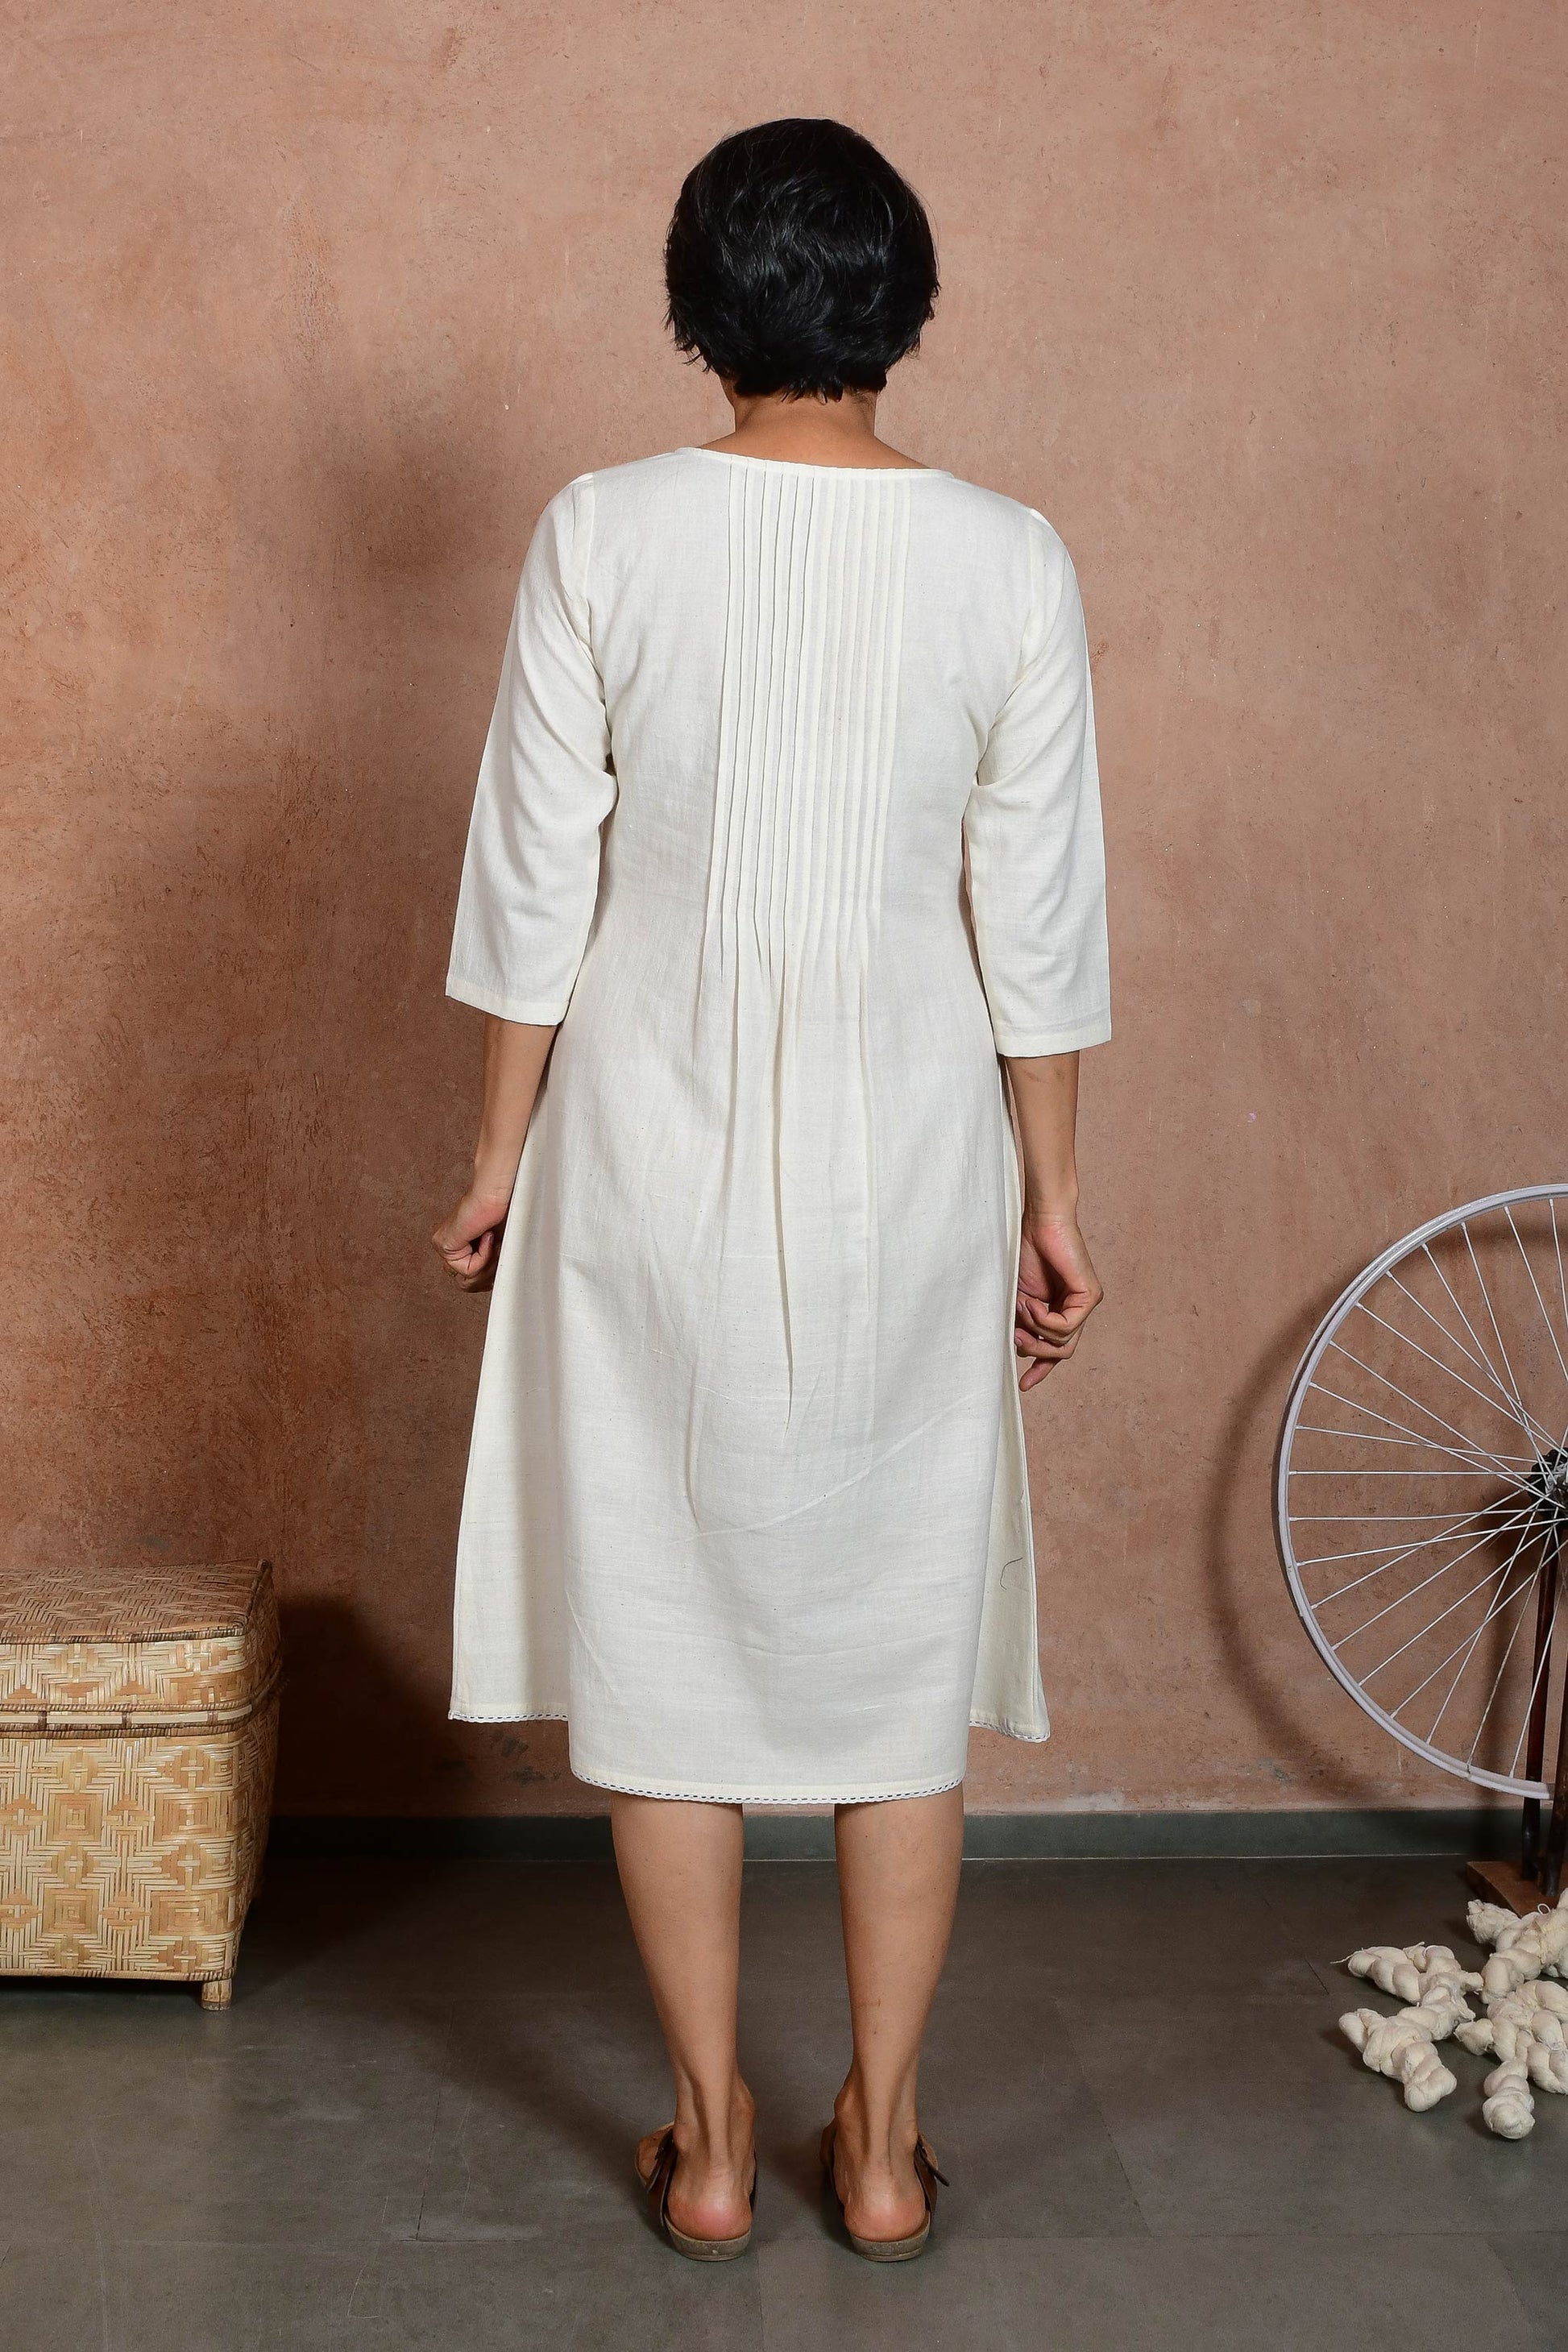 Back pose of a middle aged indian woman wearing an off white knee length dress with sleeves and knife pleat detail.